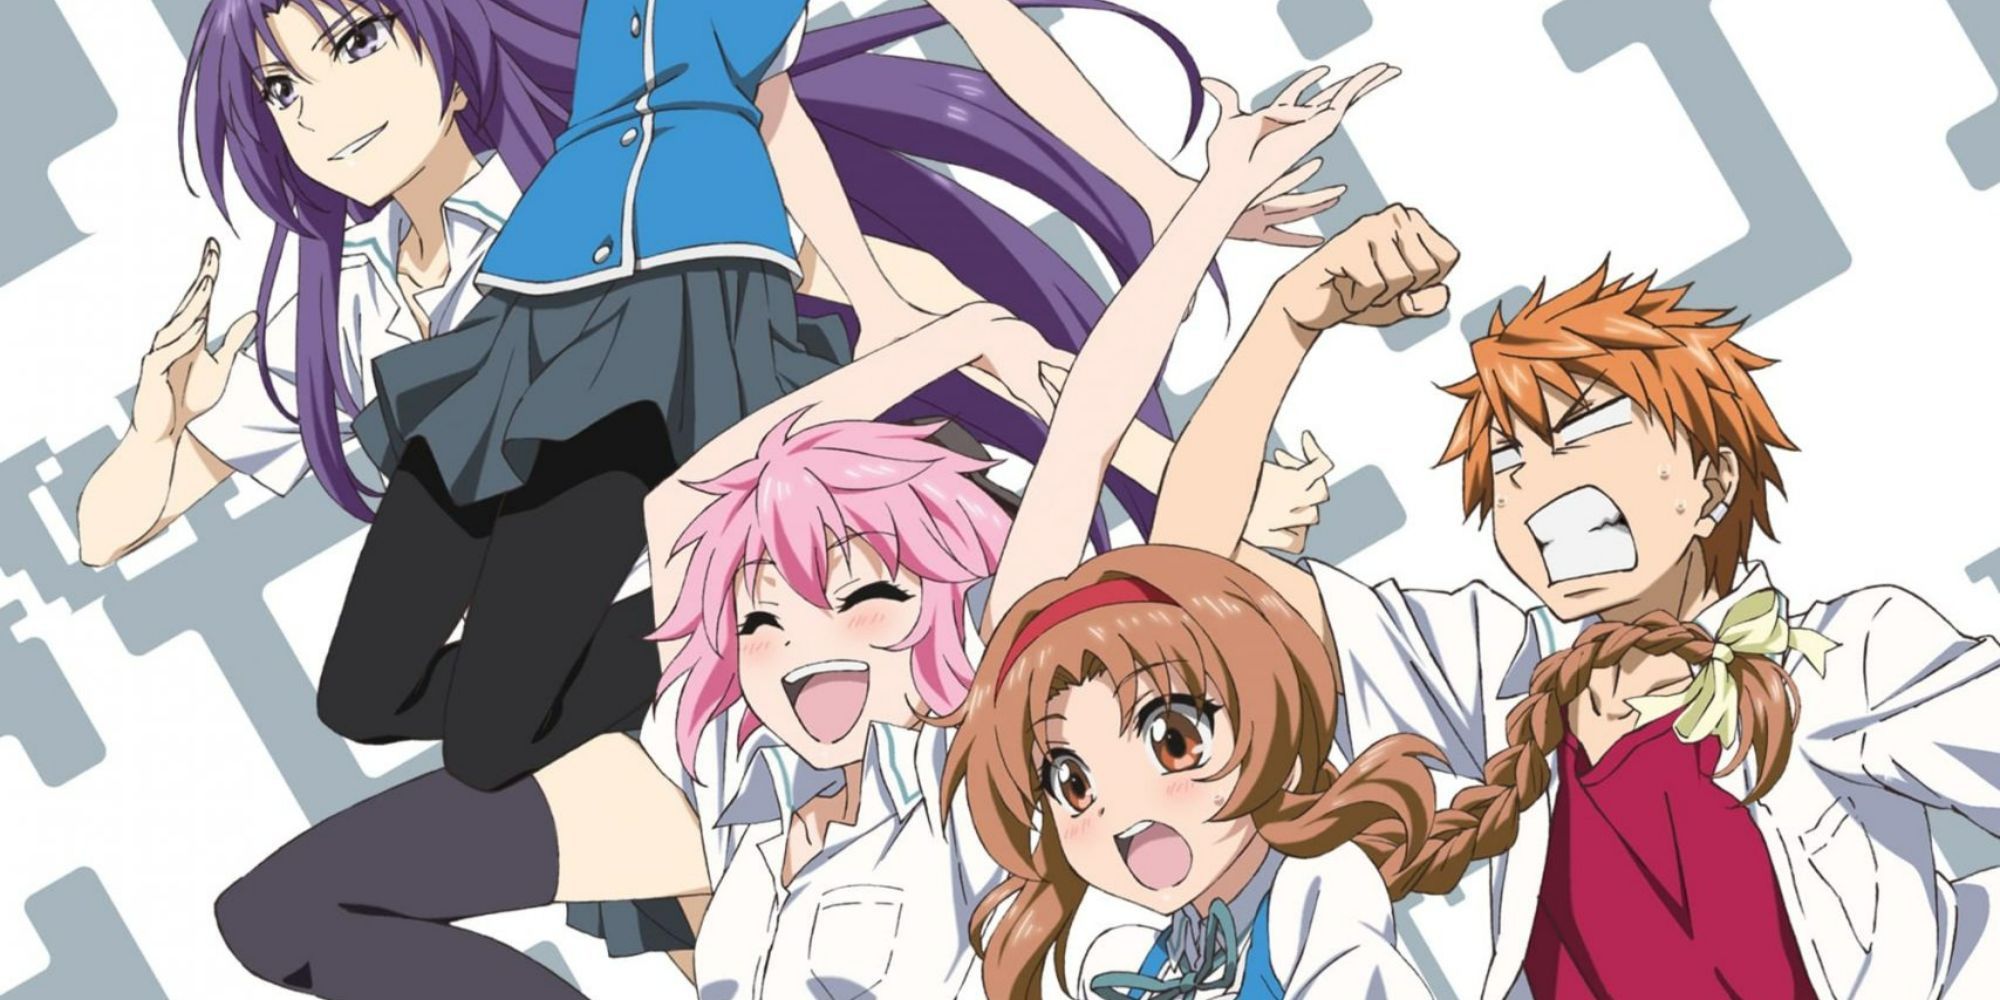 The main characters from D-Frag! running together